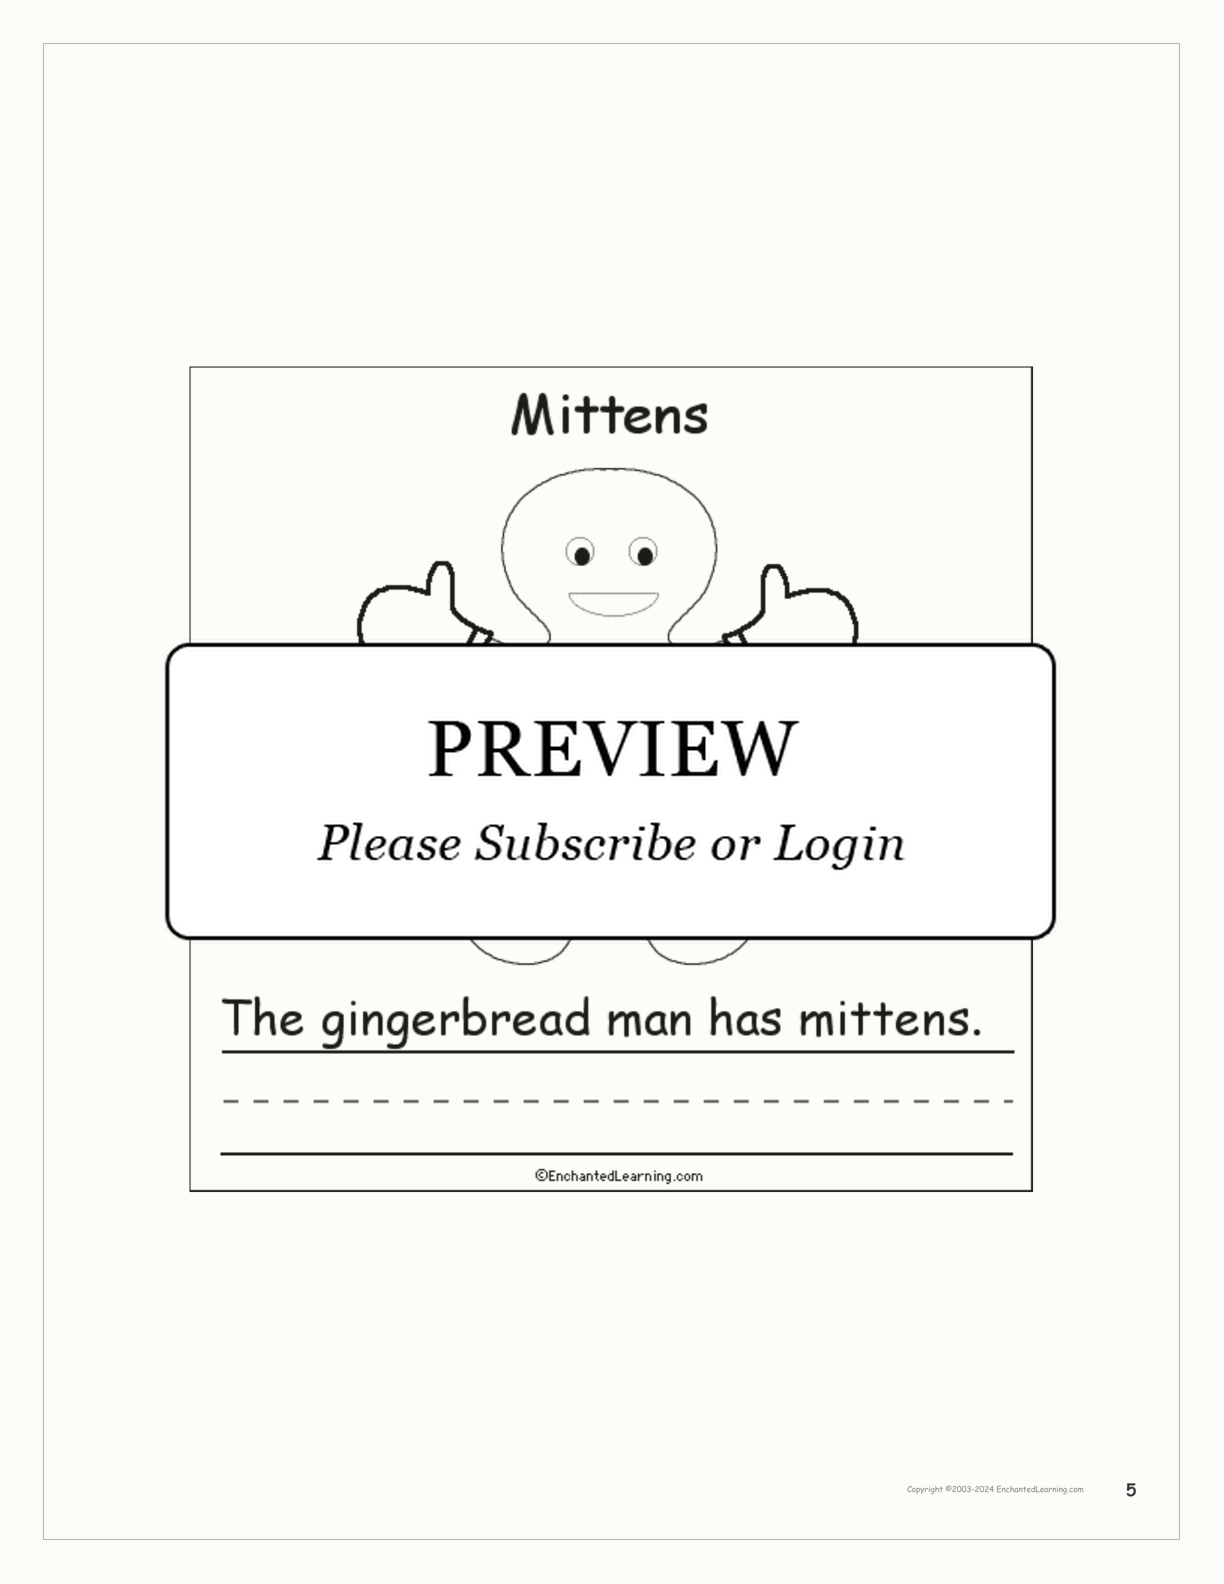 The Gingerbread Man's Clothes: Early Reader Book interactive worksheet page 5